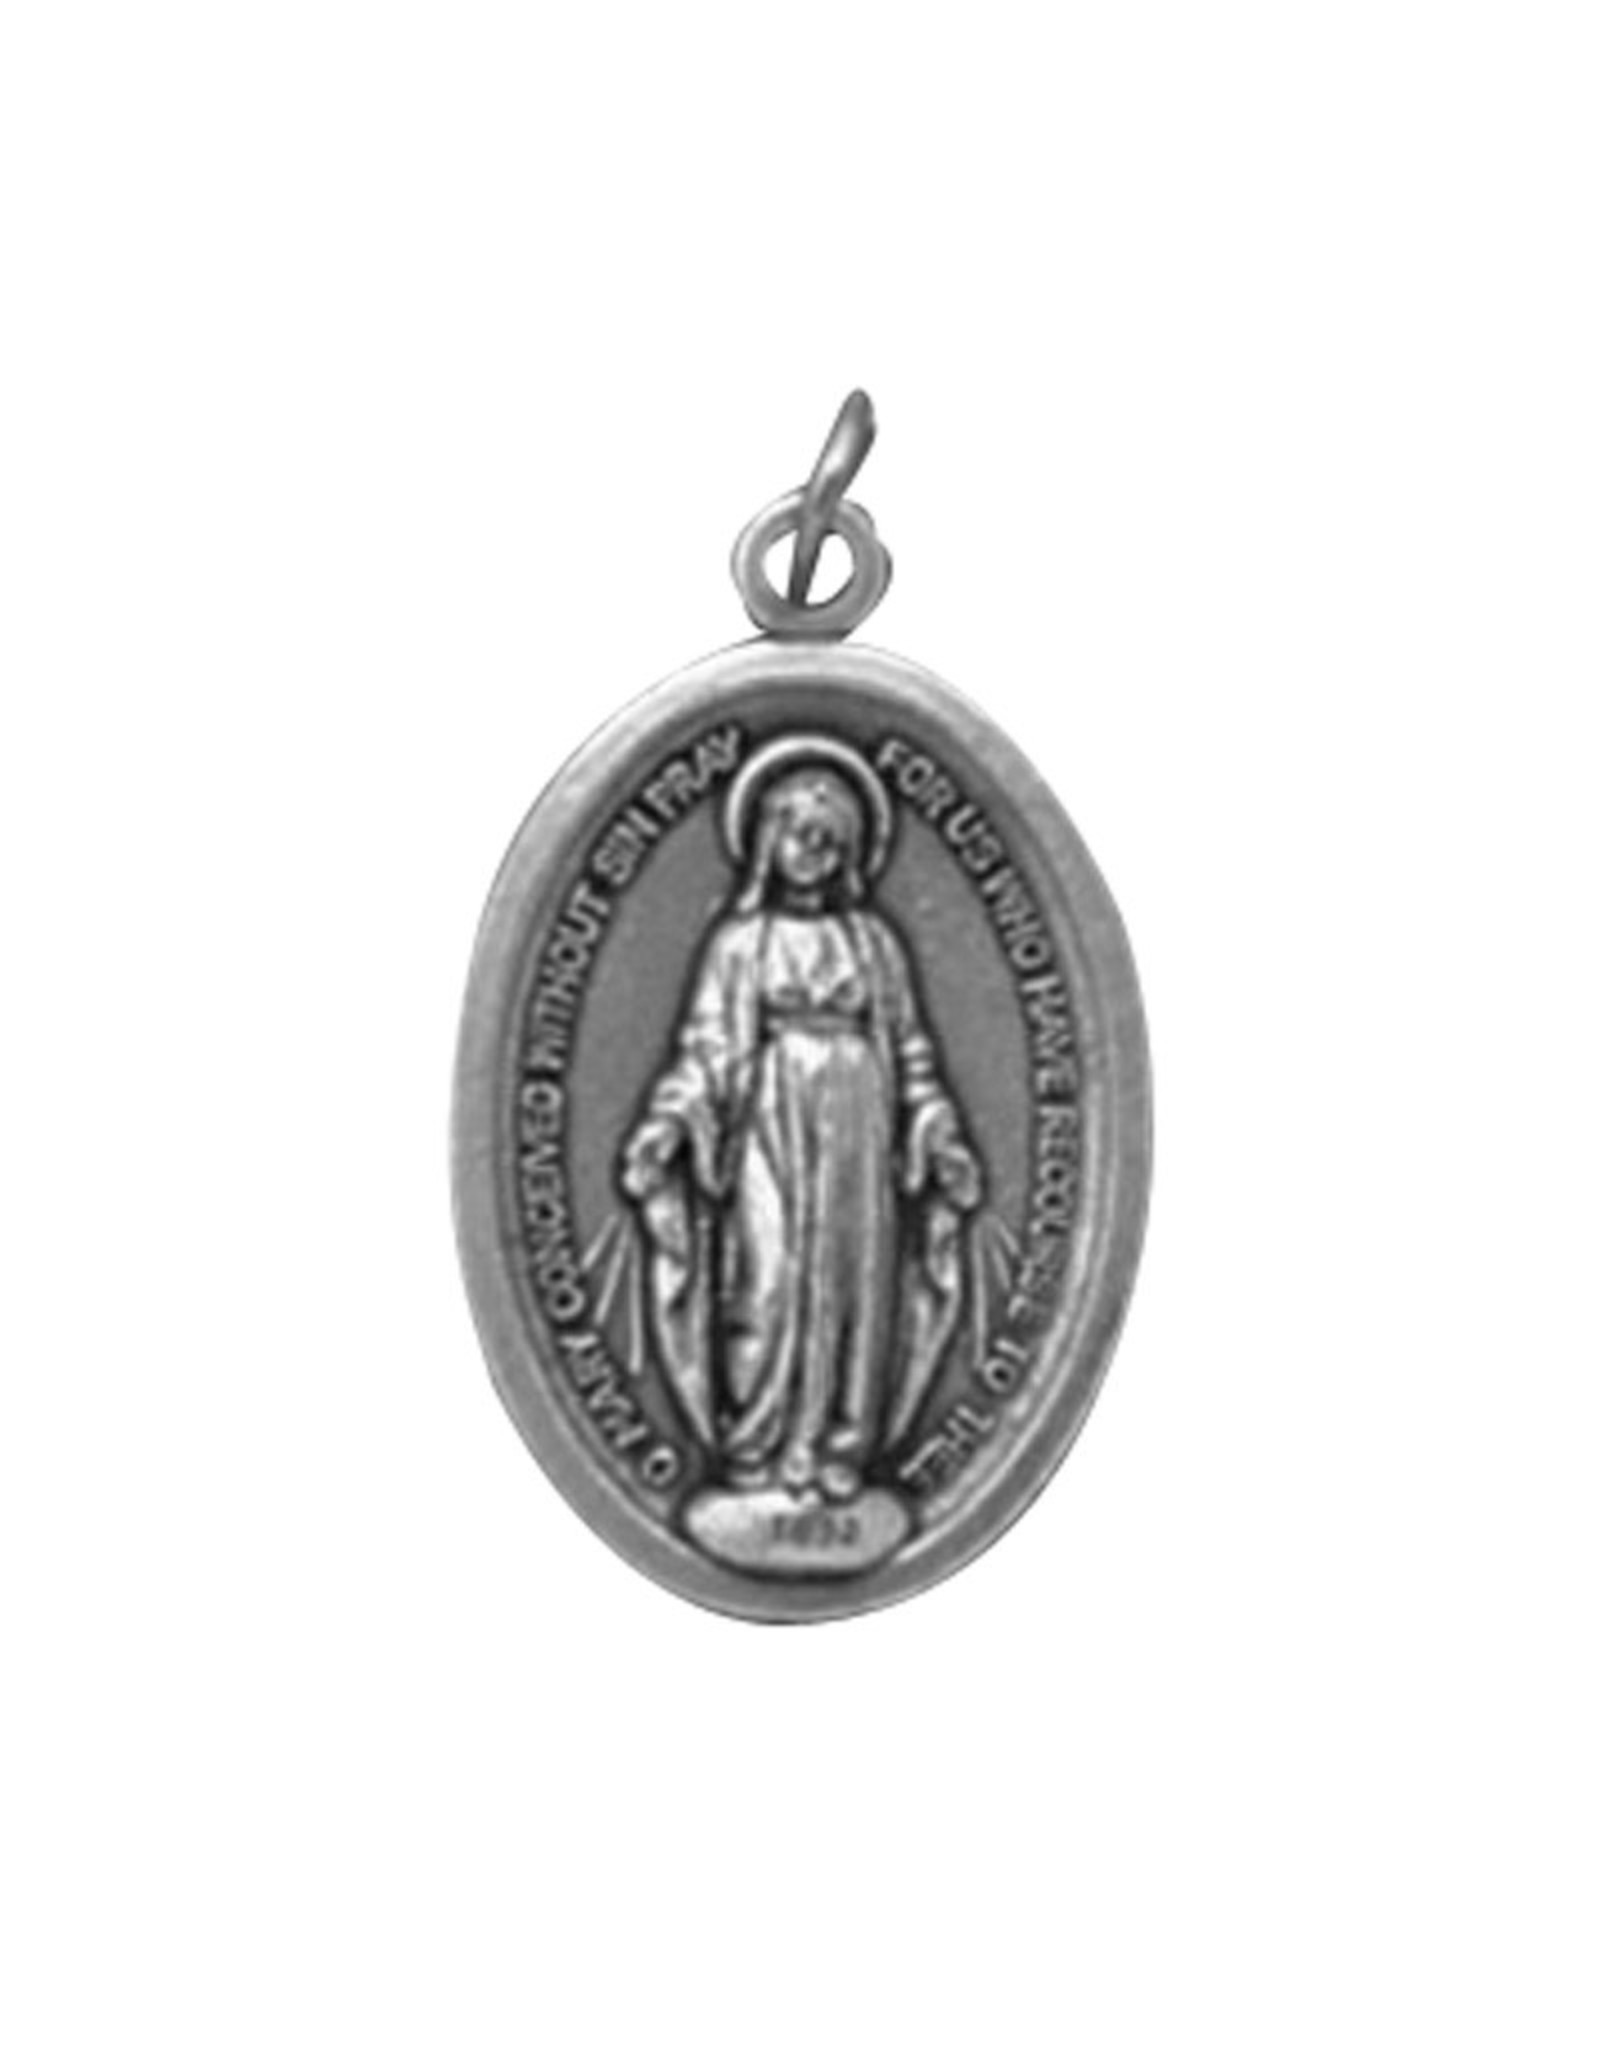 Autom Miraculous Medal, Oxidized Silver, 1"H